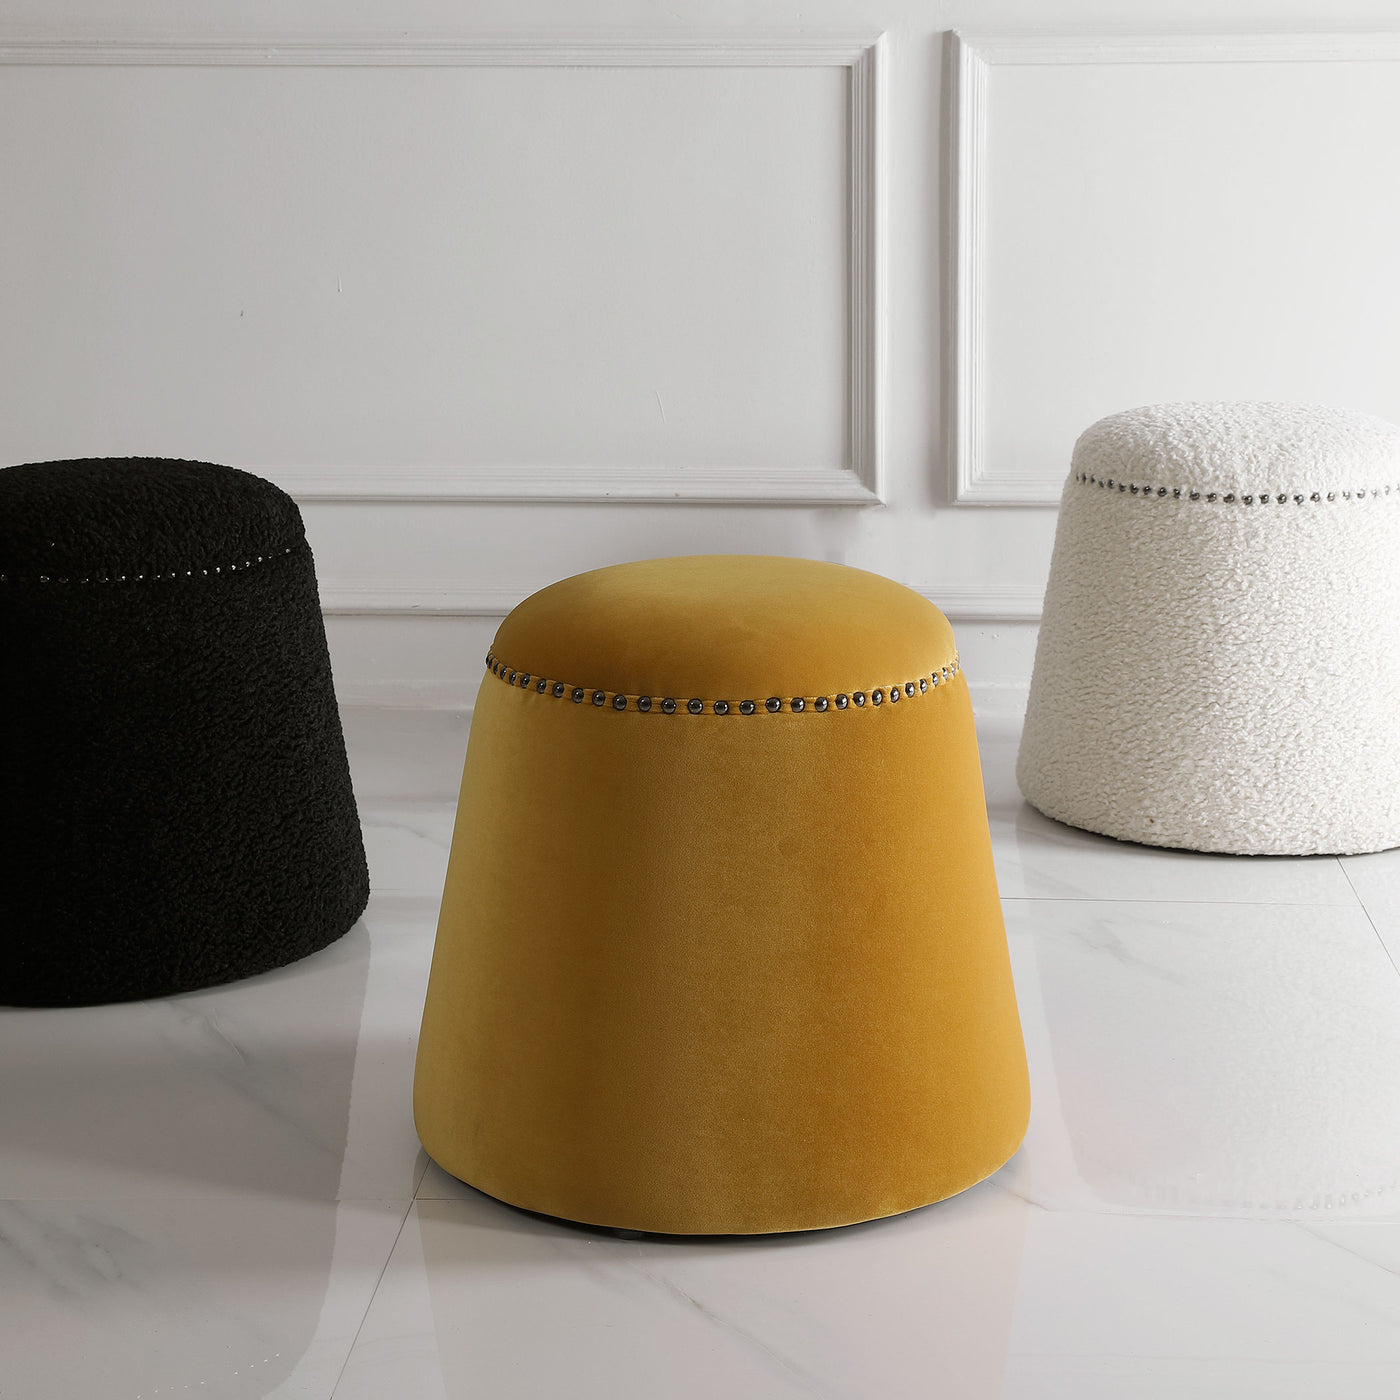 This Plush Ottoman Is Covered In A Luxurious Mustard Yellow Velvet With Black Nickel Nail Head Details. Versatile And Styl...